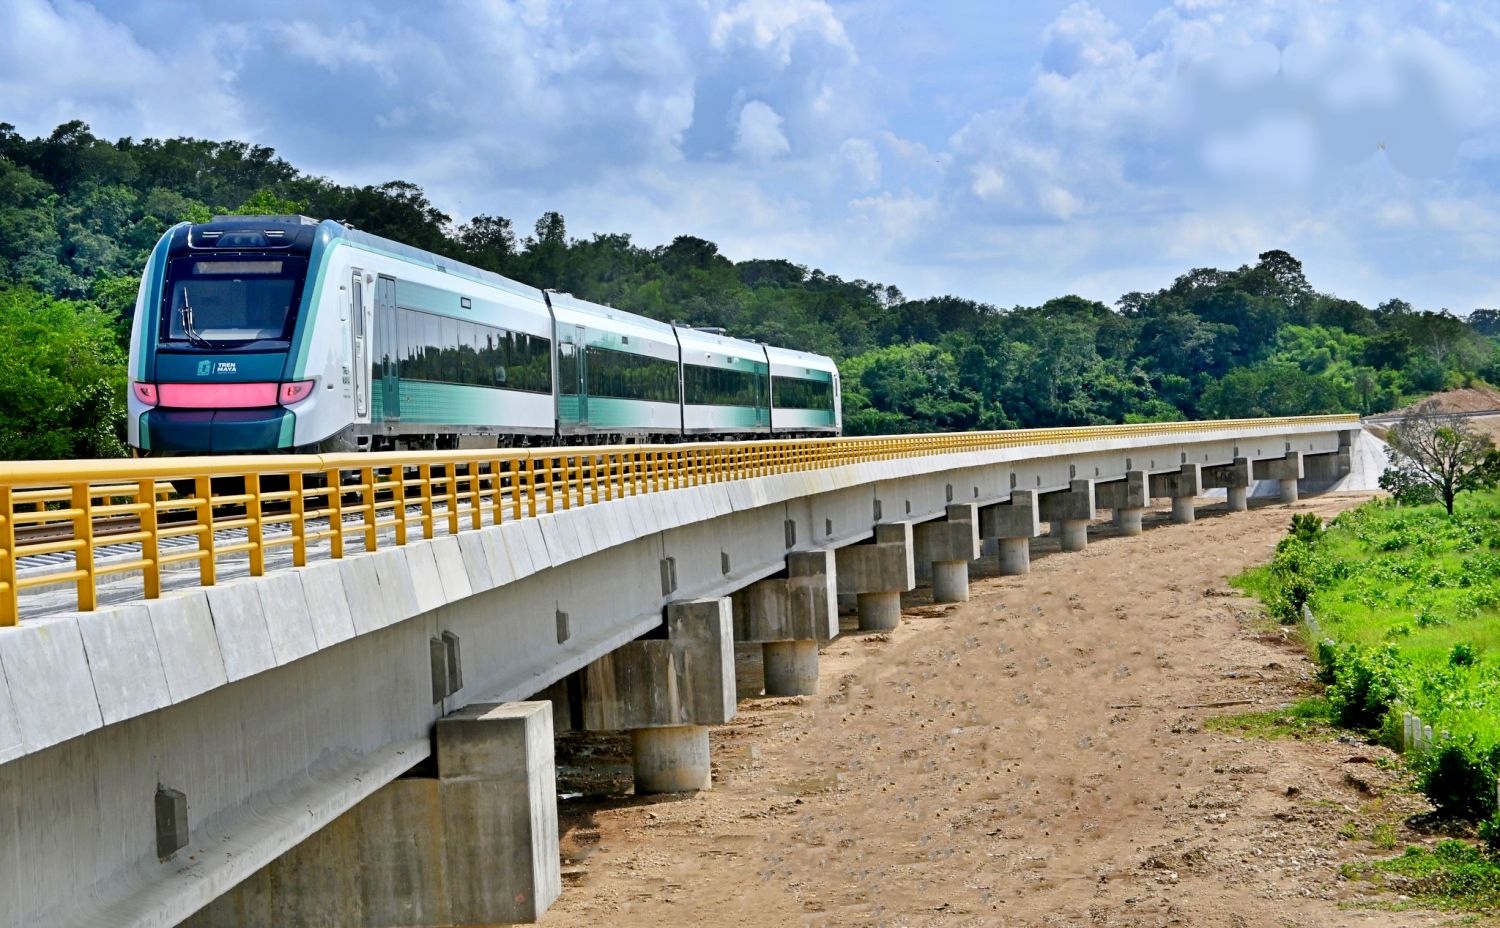 First section of the Maya Train is now open